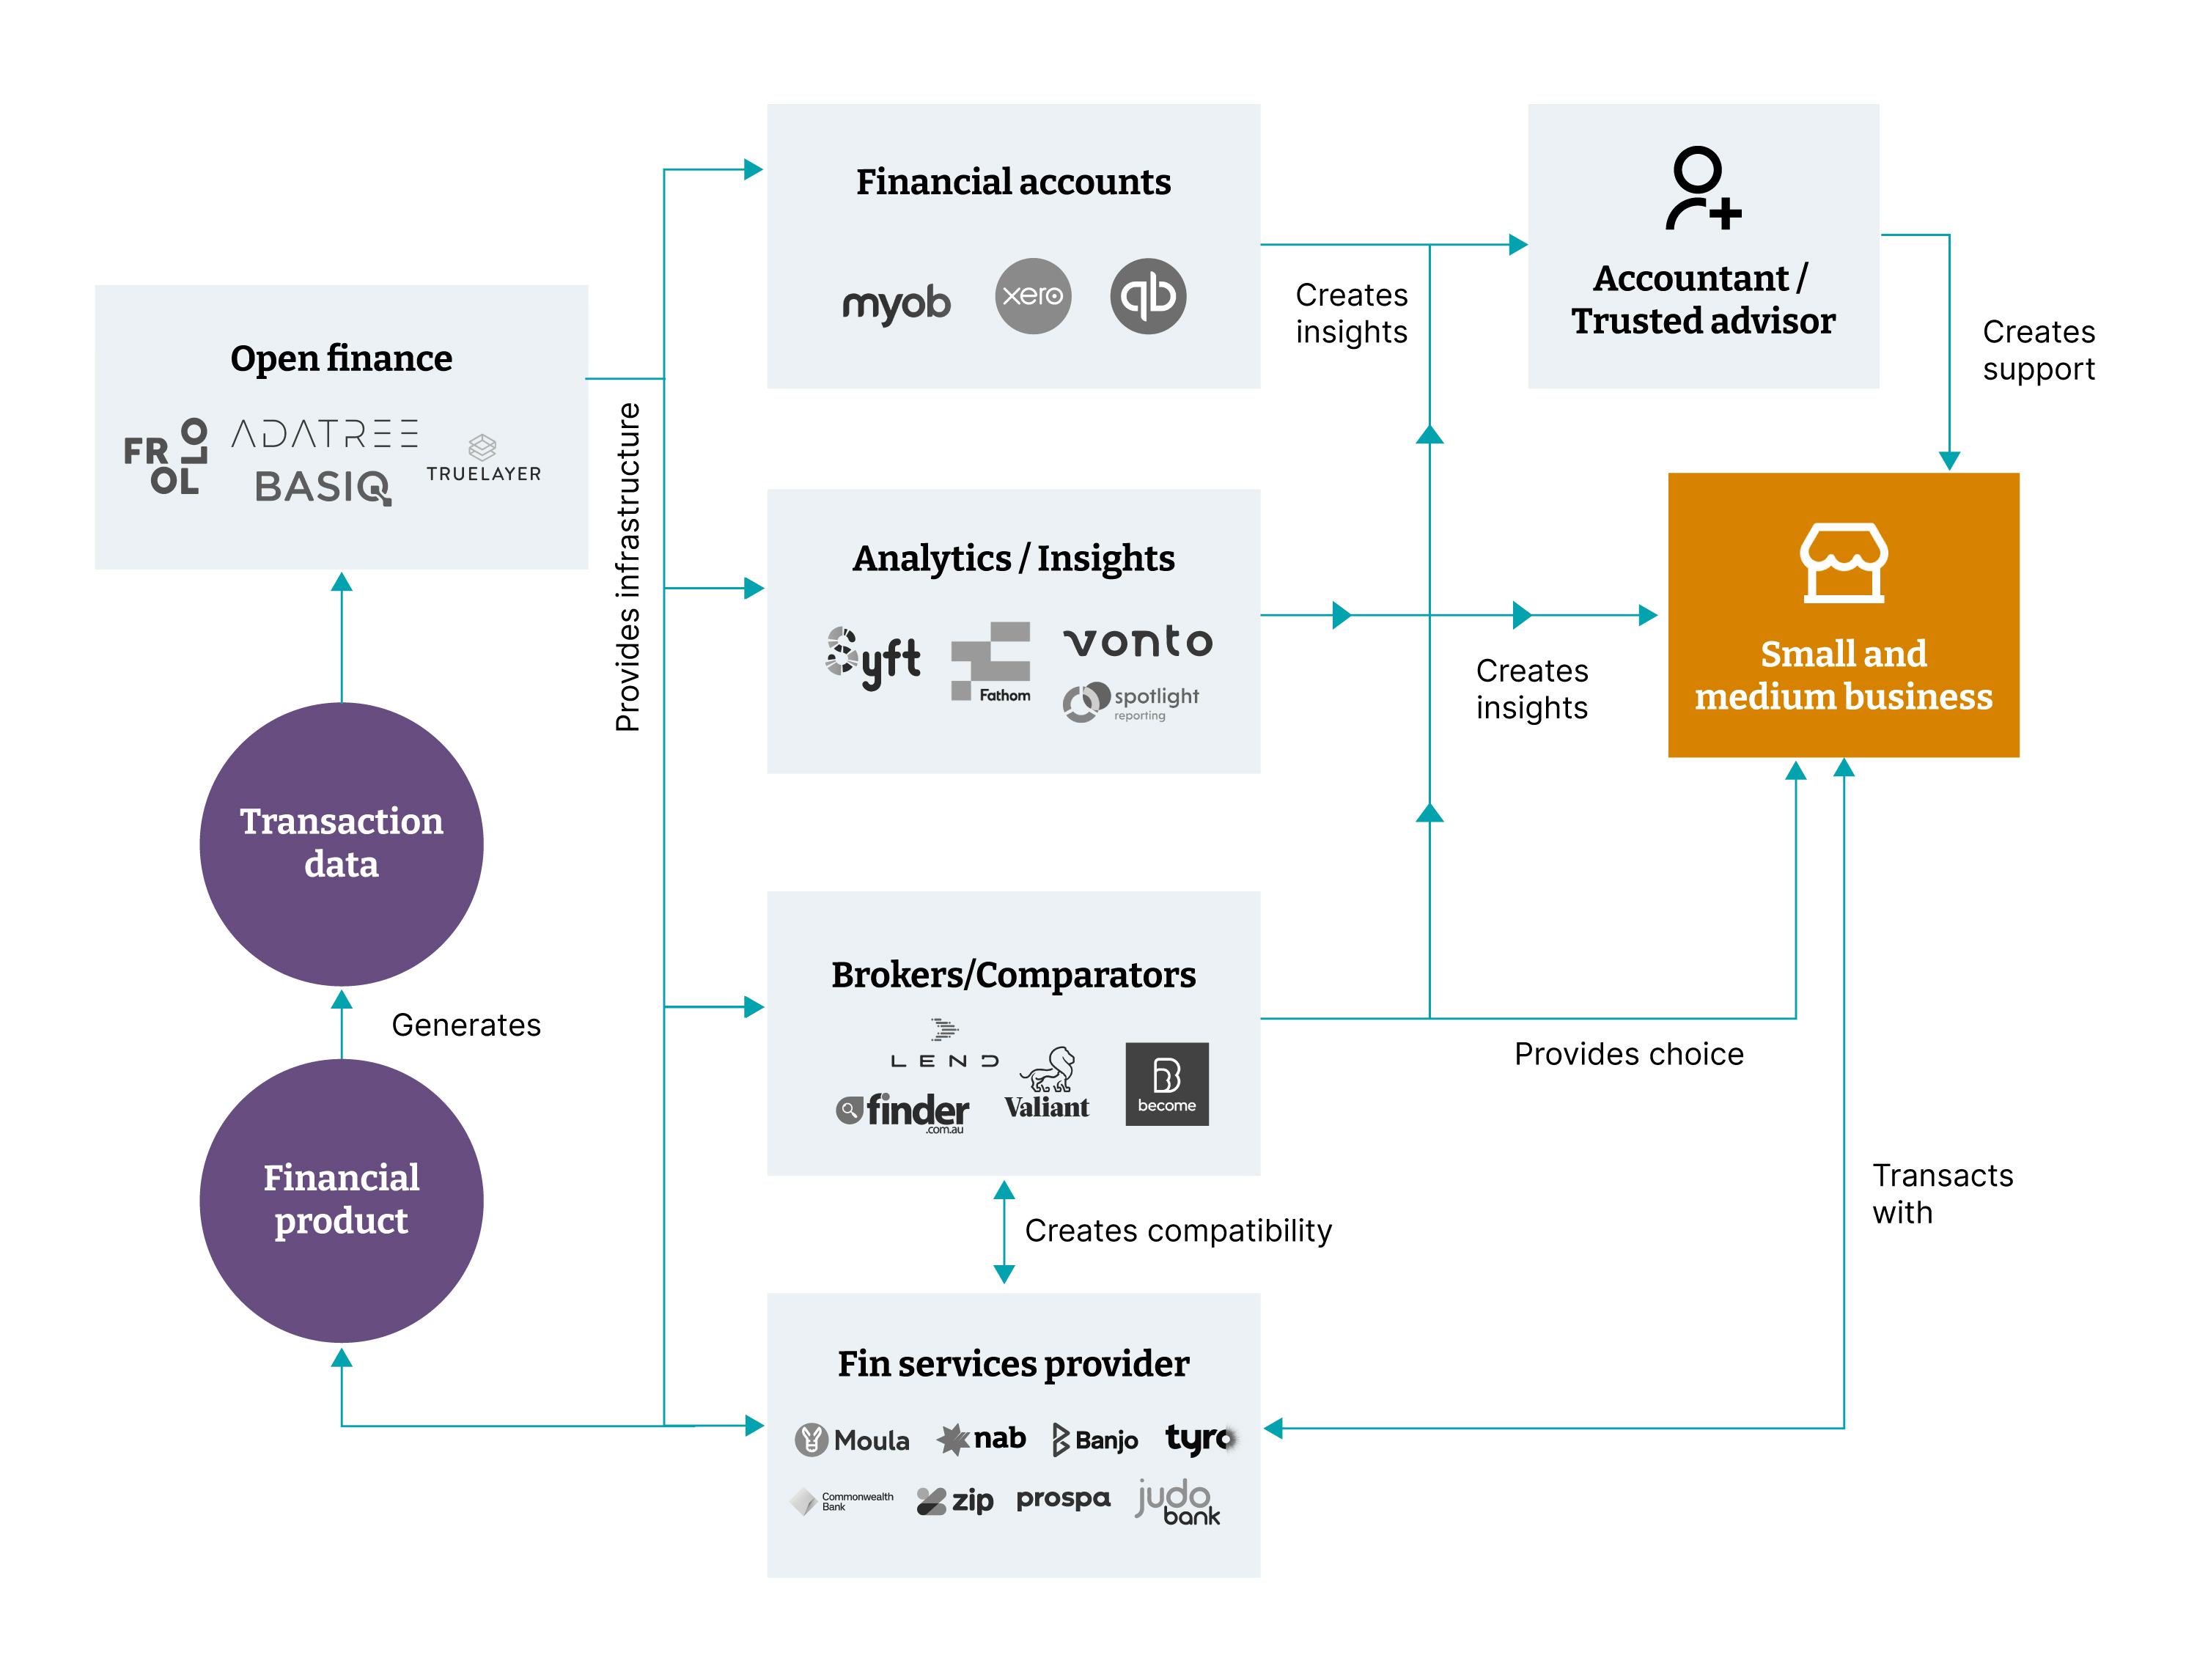 Simplified model of the SMB financial ecosystem